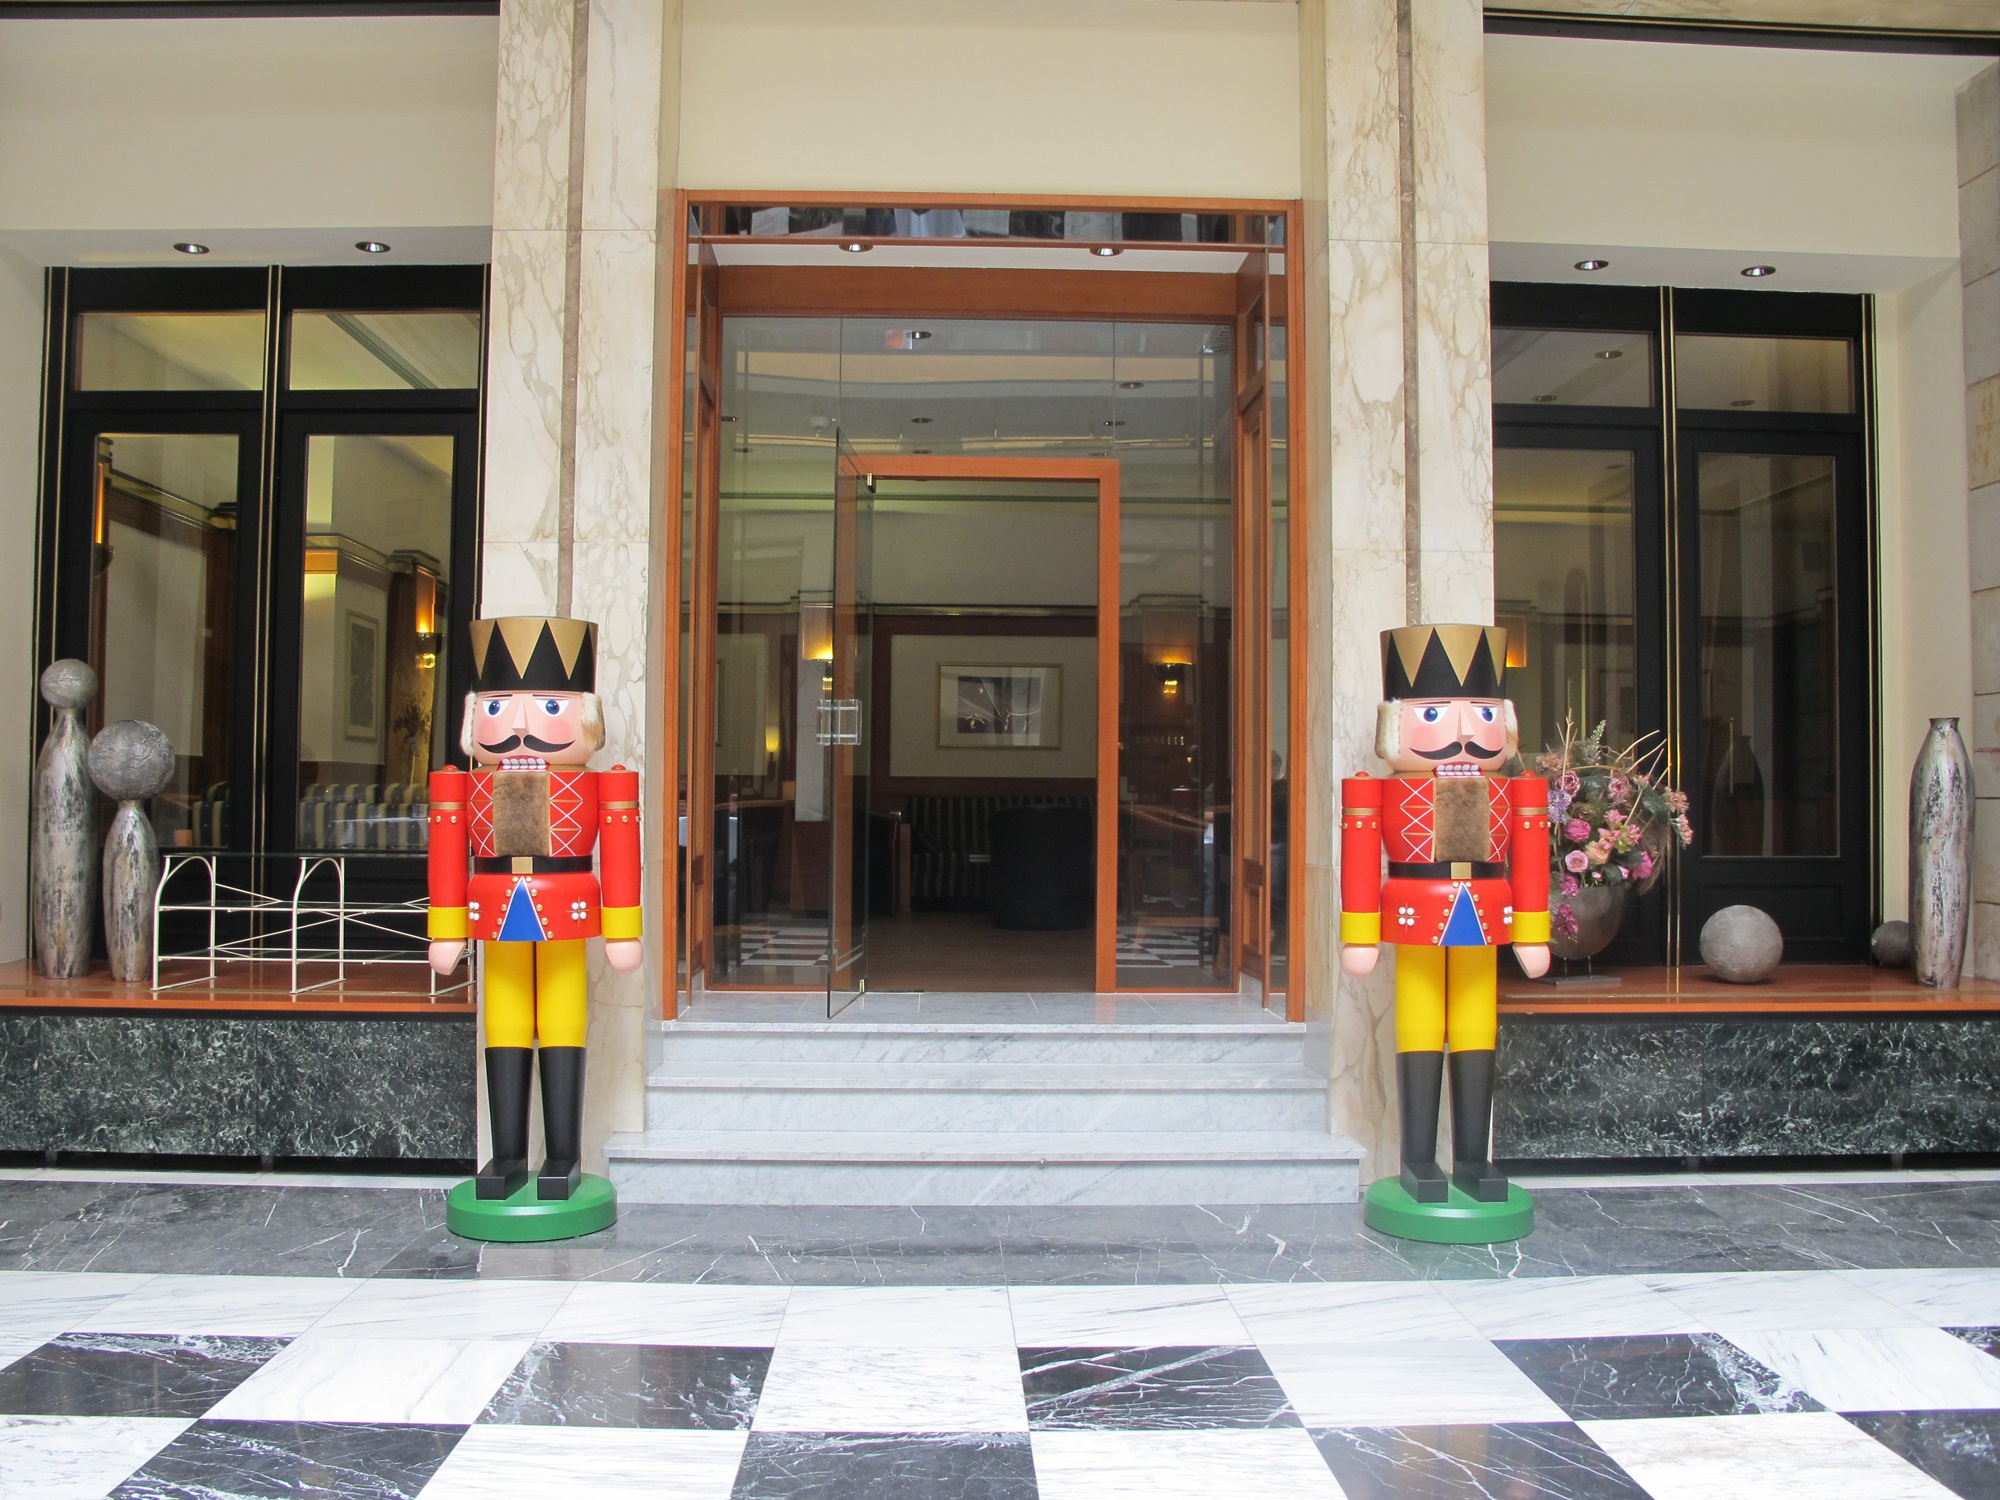 Luxurious Christmas Decoration in front of a Hotel: Two Nutcrackers are standing in from of the Entrance Area